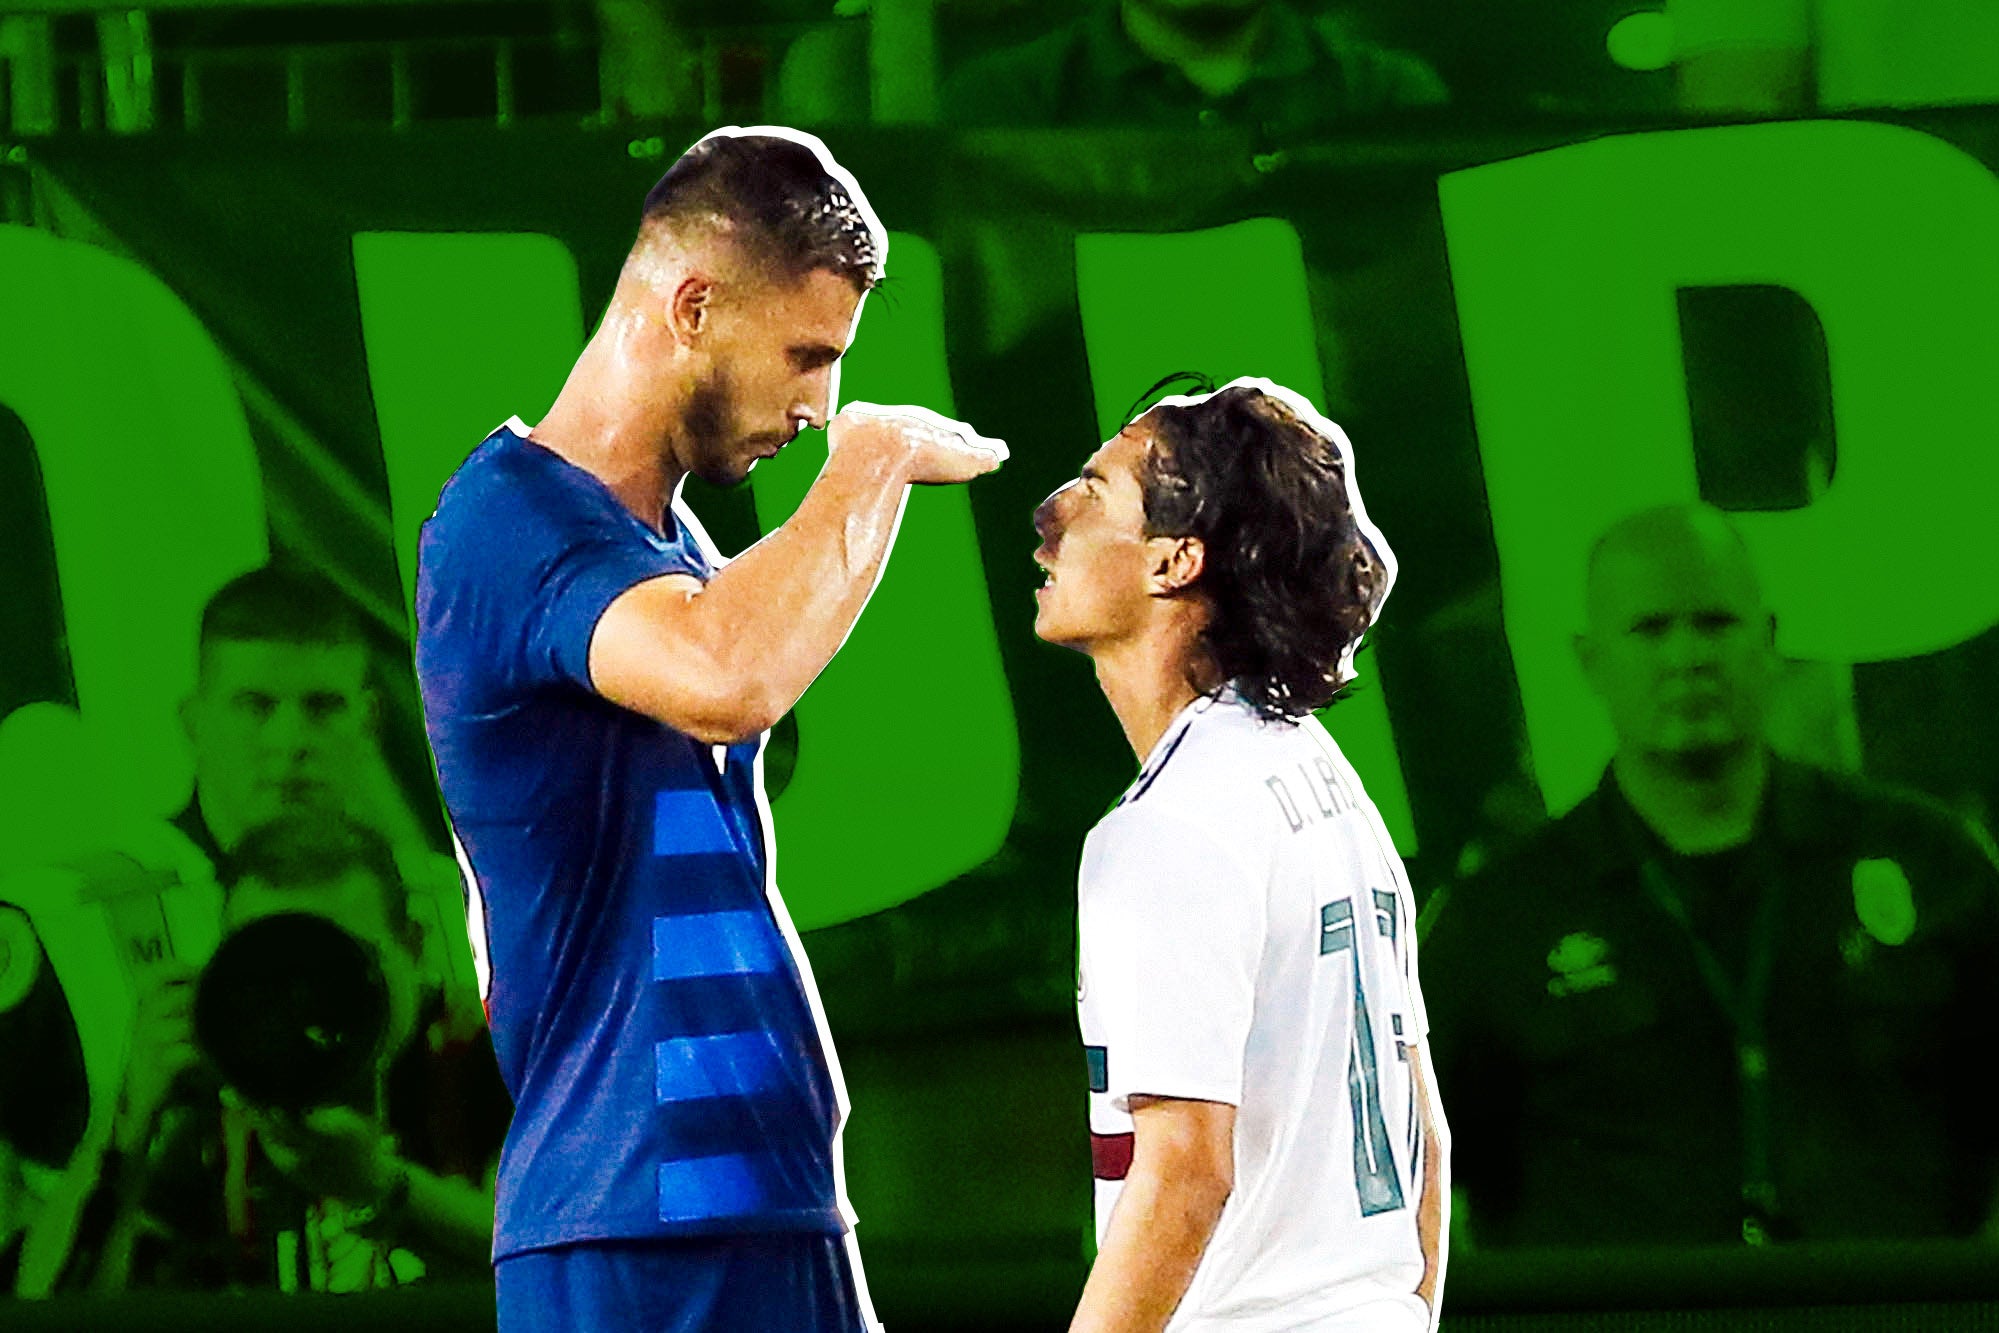 The U.S.-Mexico soccer rivalry is getting ugly, and I love it.